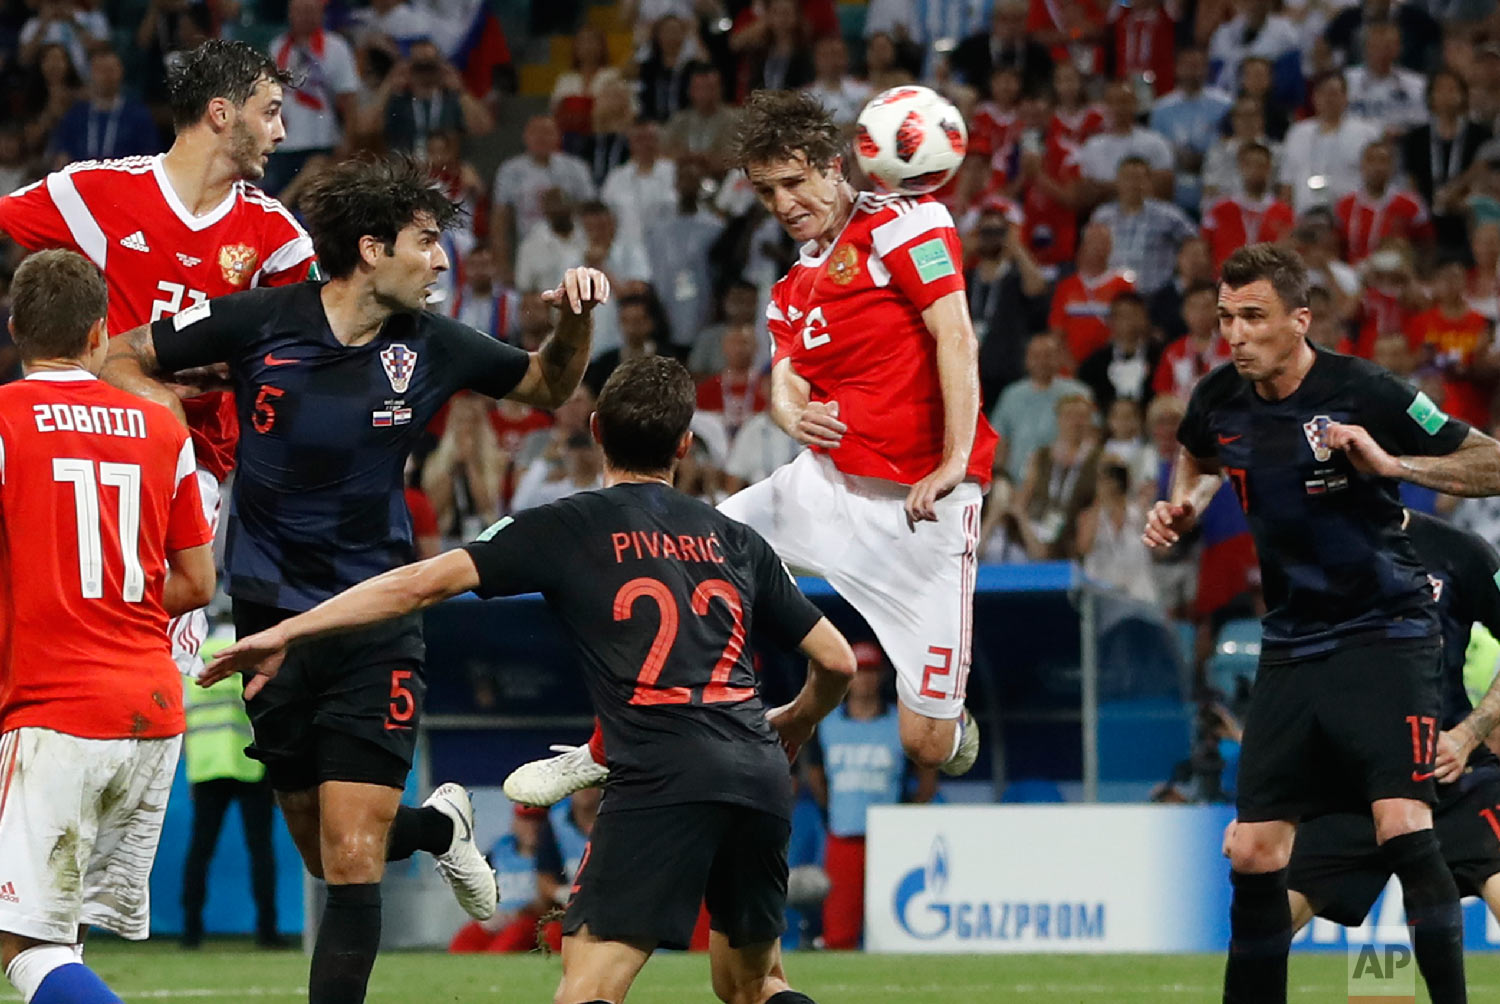  Russia's Mario Fernandes , centre, scores his side's second goal during the quarterfinal match between Russia and Croatia at the 2018 soccer World Cup in the Fisht Stadium, in Sochi, Russia, Saturday, July 7, 2018. (AP Photo/Darko Bandic) 